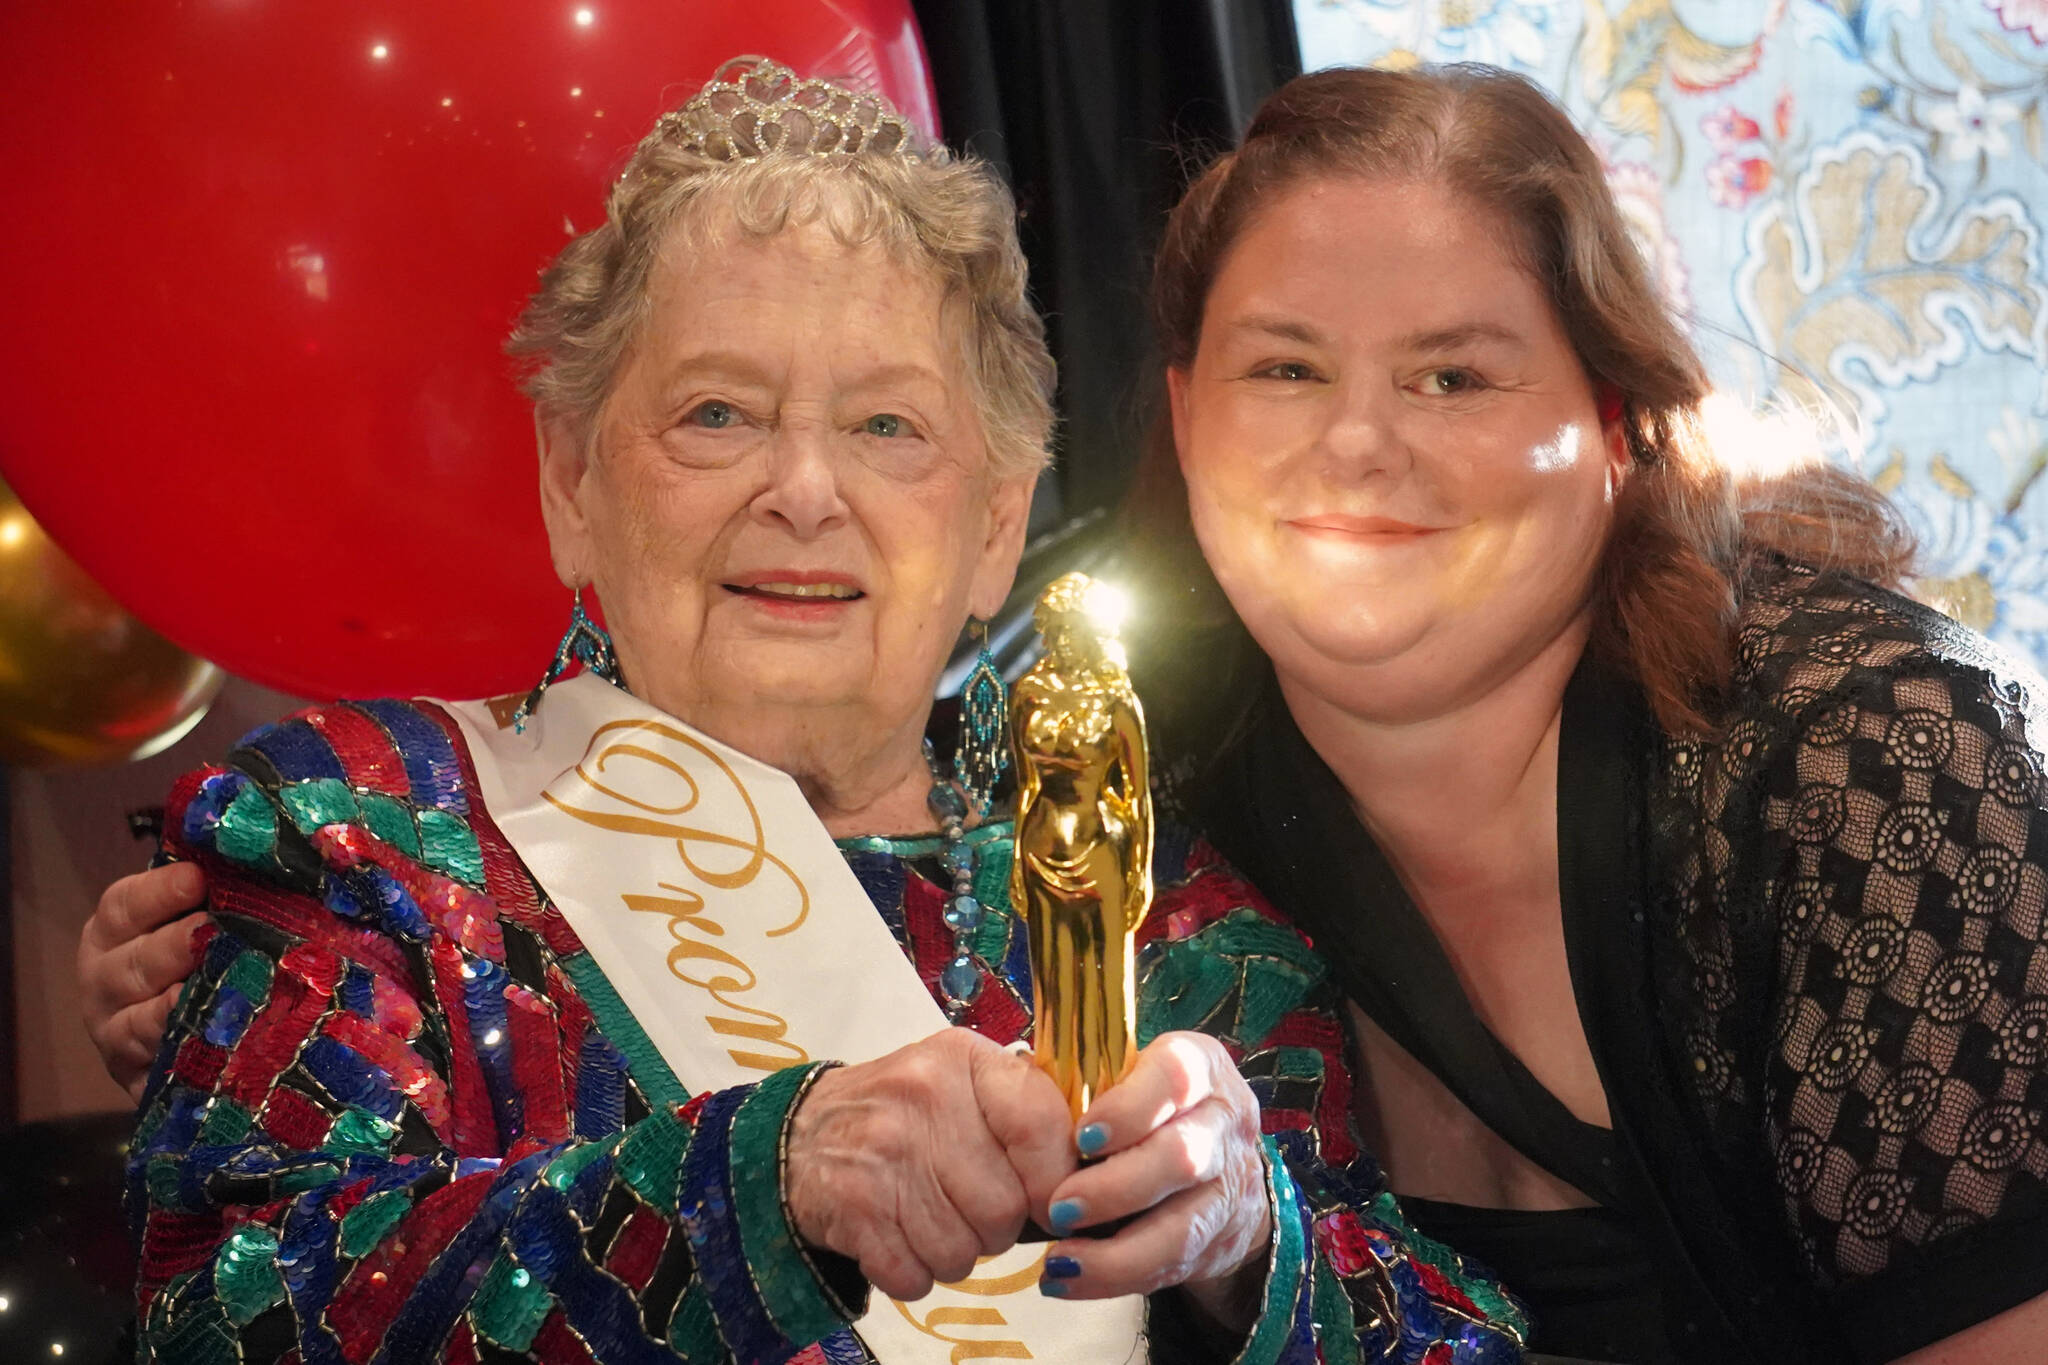 Senior Prom Queen Lorraine Ashcraft sits for a photo with Life Enrichment Director Carrie Nelson at the 2023 High Roller Senior Prom at Aspen Creek Senior Living in Kenai, Alaska, on Friday, Sept. 22, 2023. (Jake Dye/Peninsula Clarion)